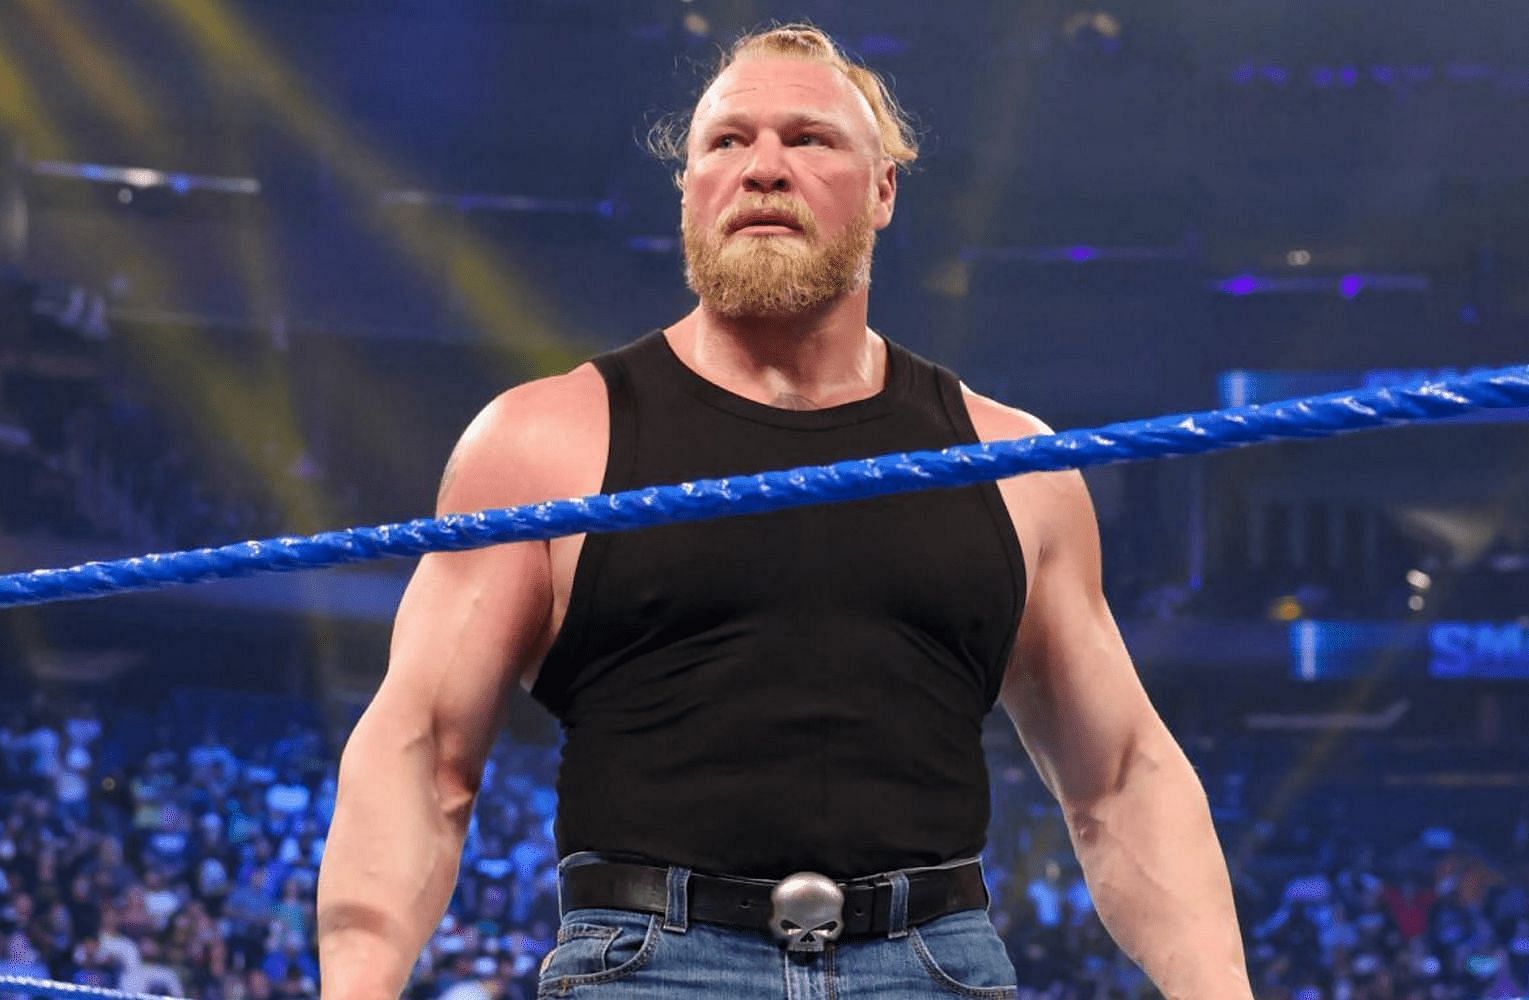 Brock Lesnar returned to the WWE at SummerSlam 2021